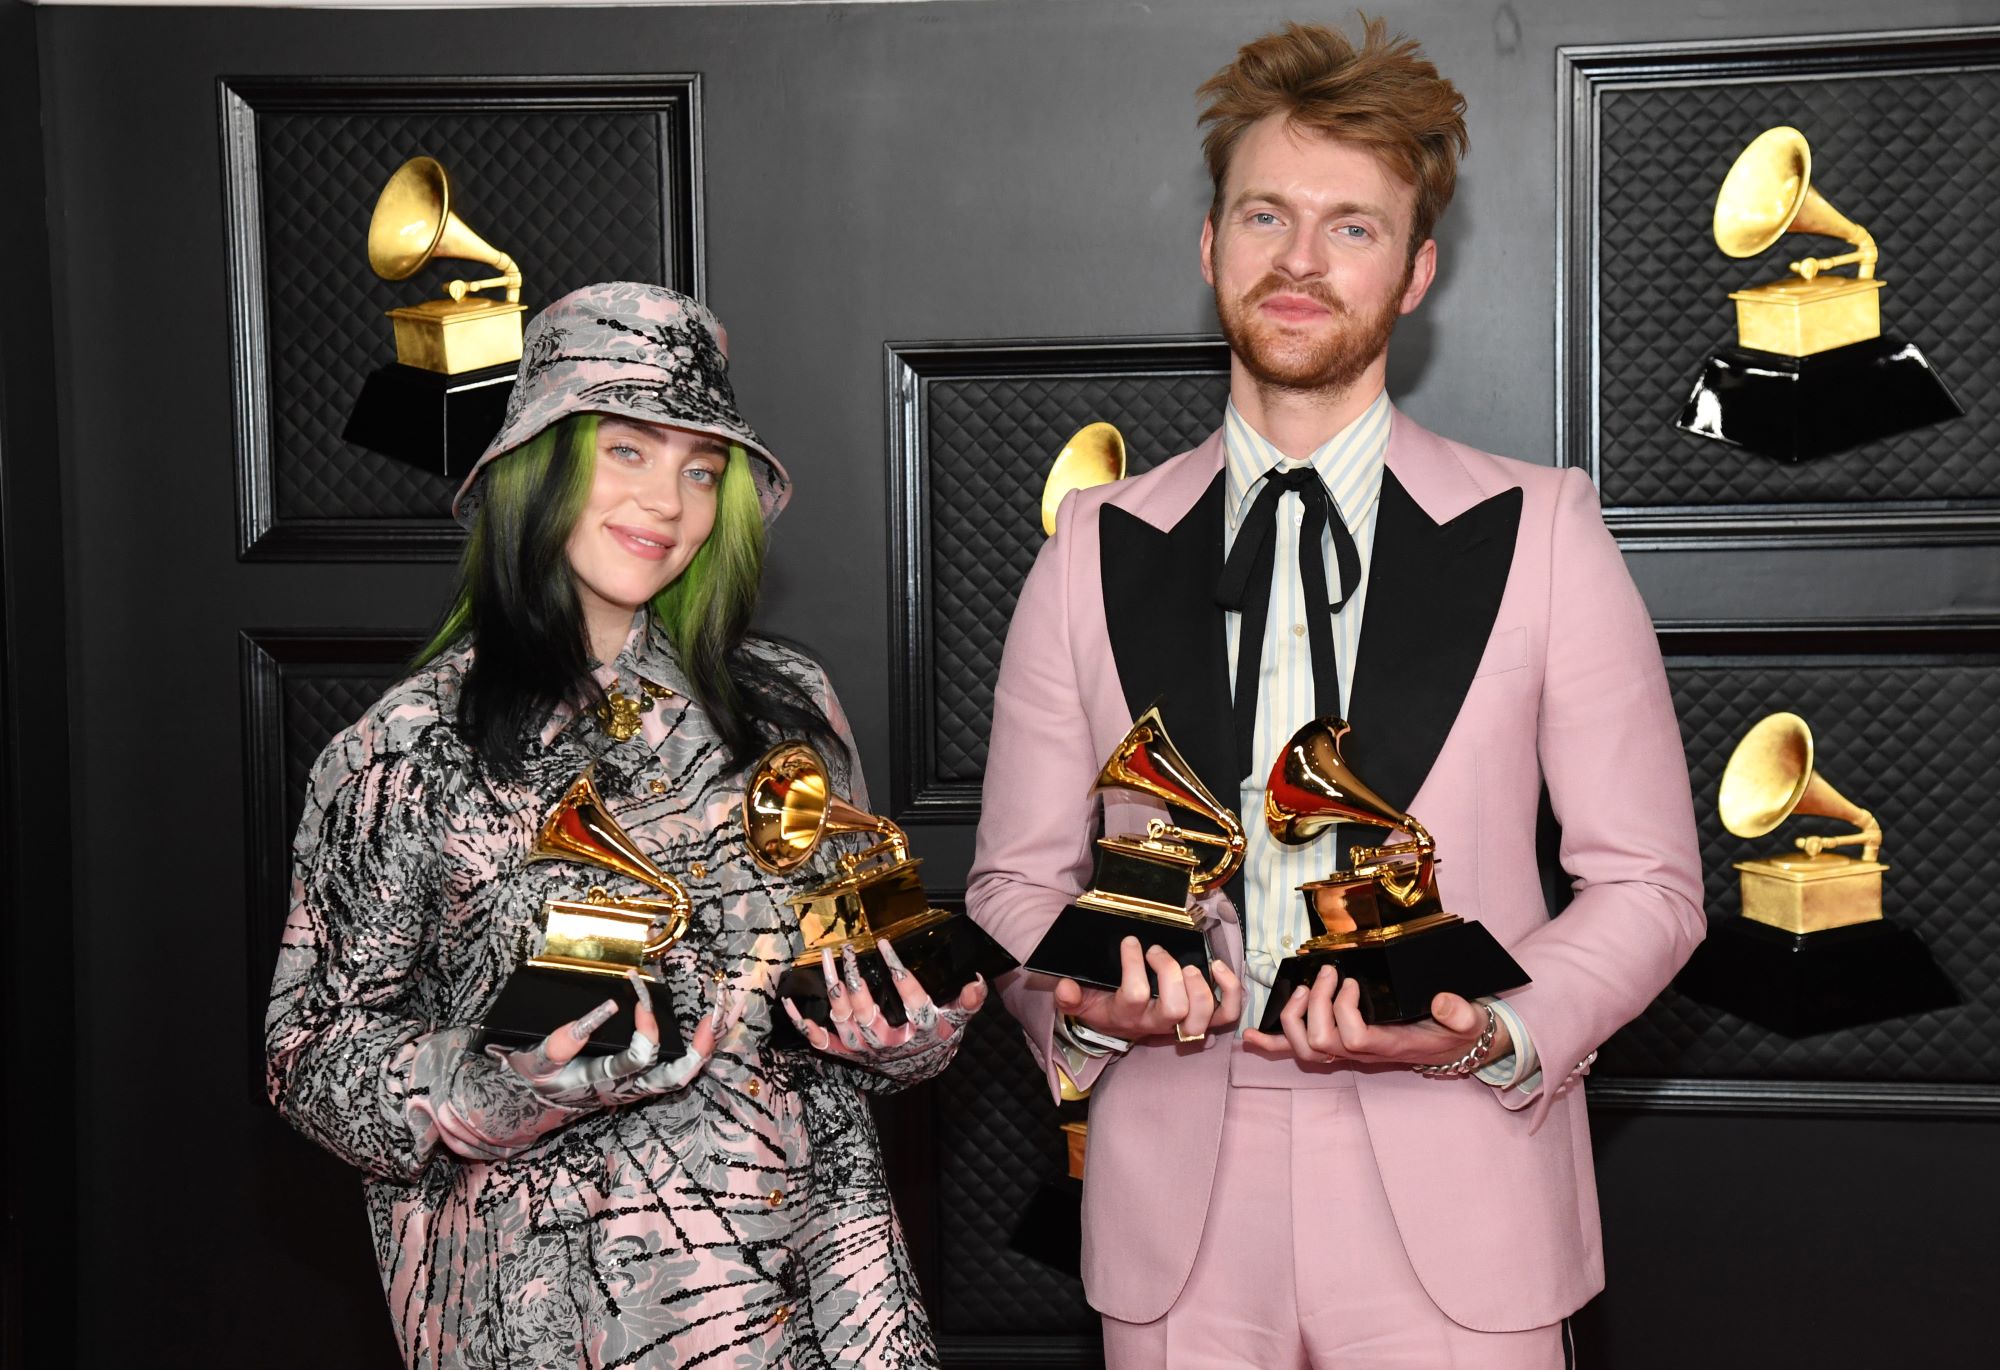 Billie Eilish dressed in a black grey and pink pattern outfit holding grammy awards next to her brother who is wearing a pink suit with a black collar and Texan bow tie with a white undershirt holding more grammy awards standing in front of a grey background. Eilish and Finneas won a Grammy for their song 'No Time to Die,' which was made for Daniel Craig's last James Bond movie, in theaters Oct. 8.